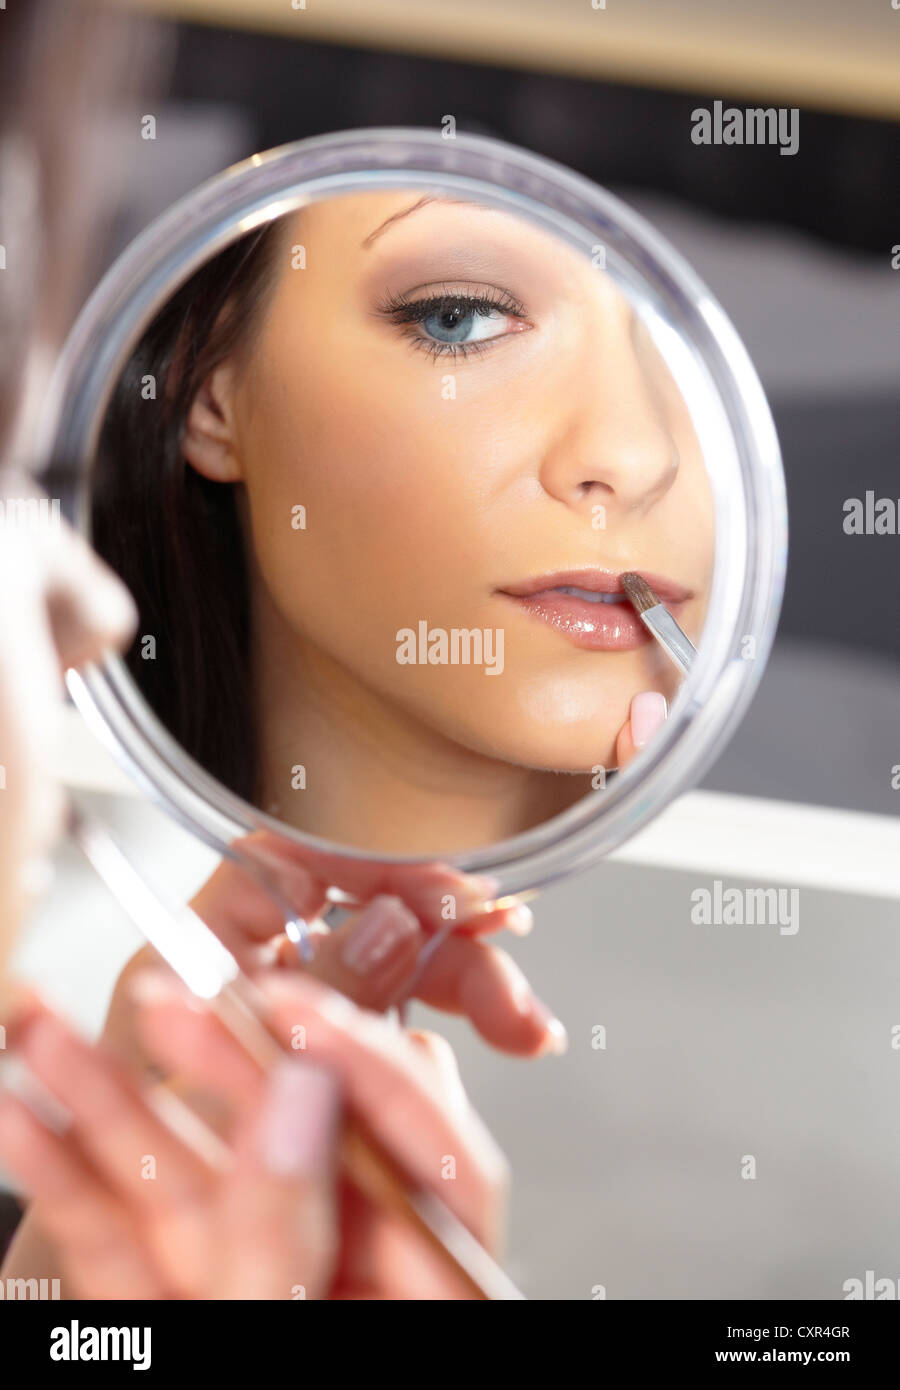 Young woman holding a hand mirror and a lipstick brush Stock Photo